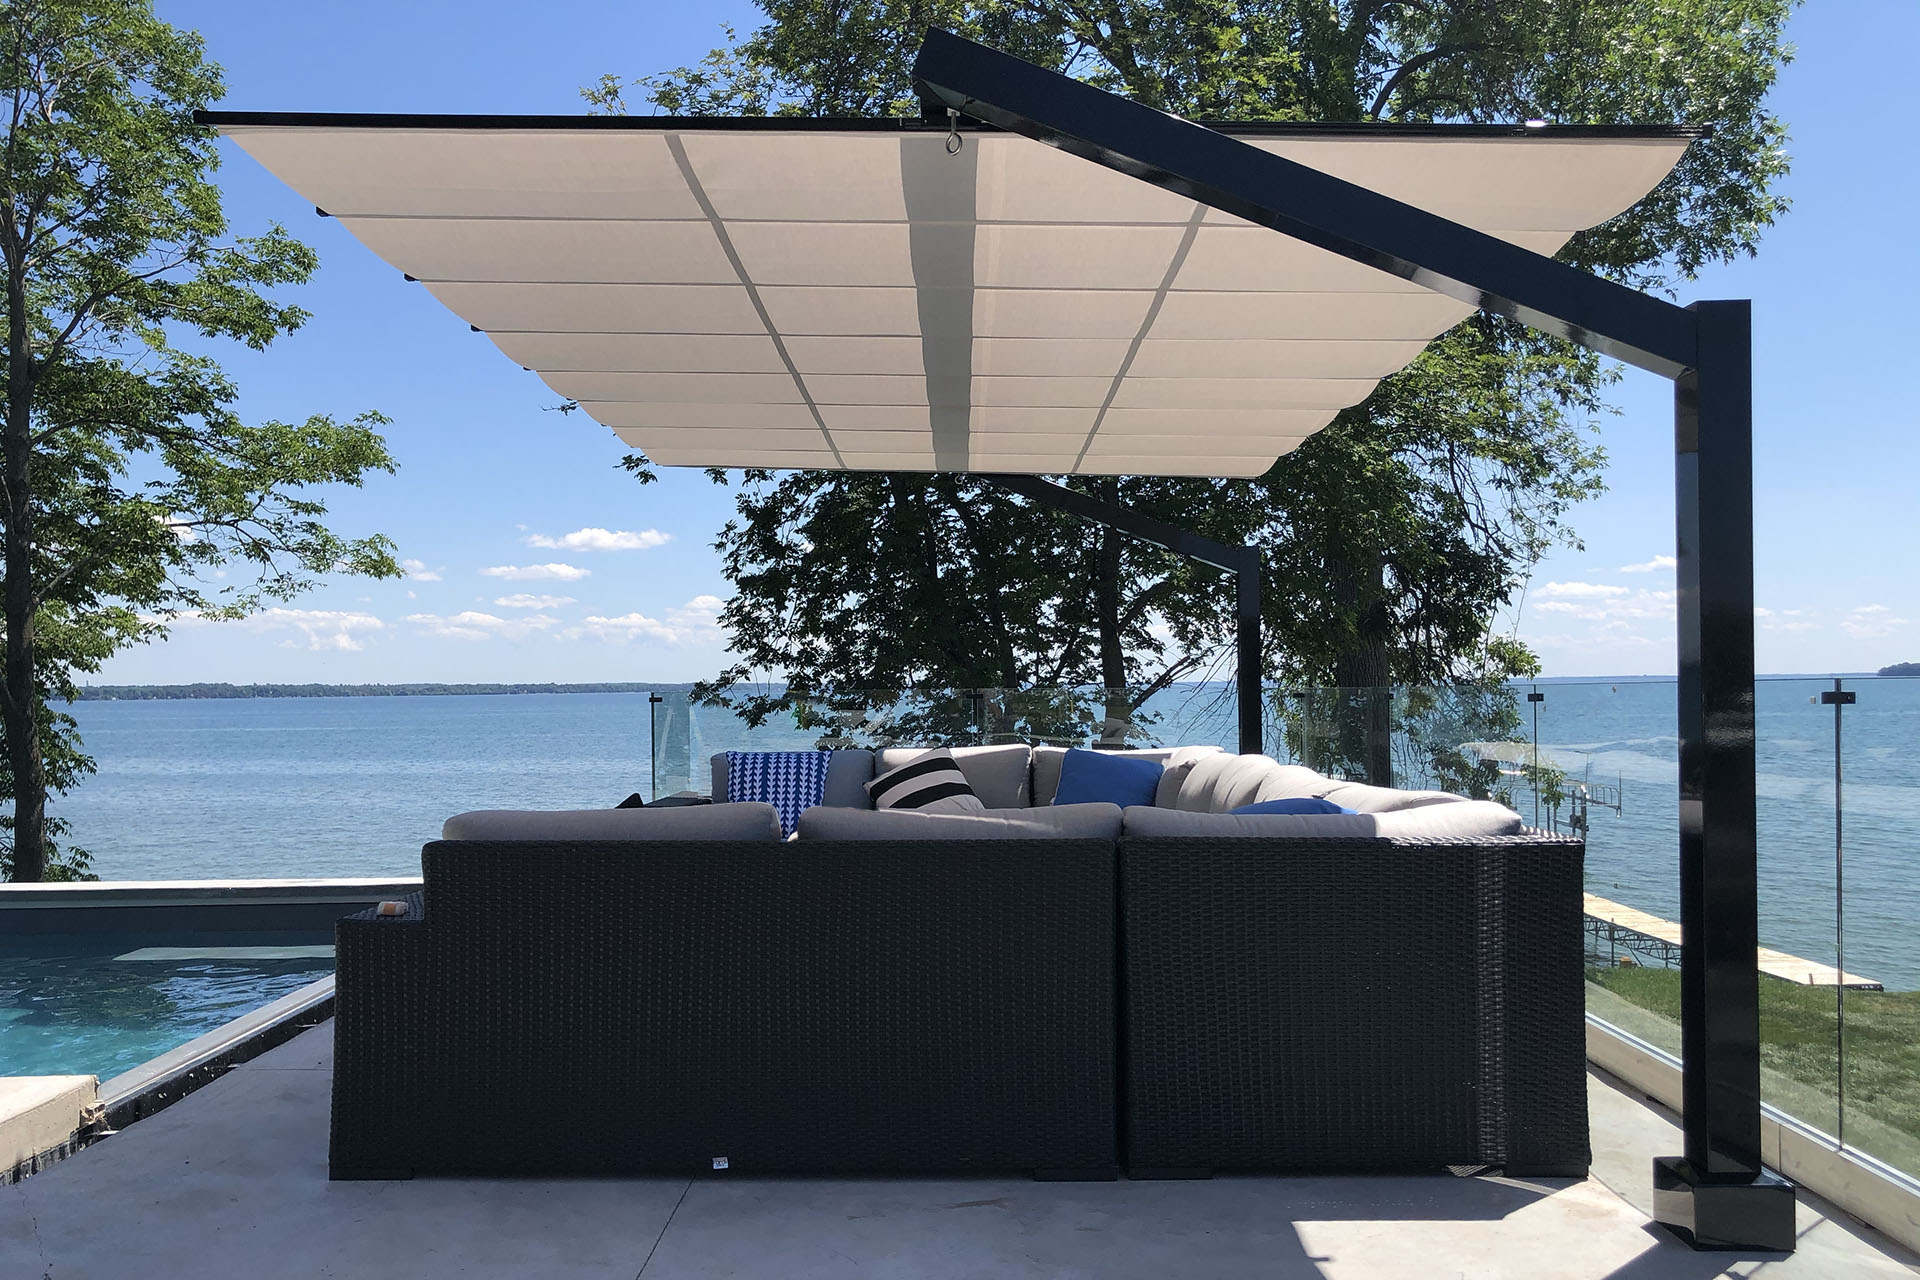 retractable freestanding canopy structures canopies outdoor simcoe lake shadefx overview contact shadefxcanopies